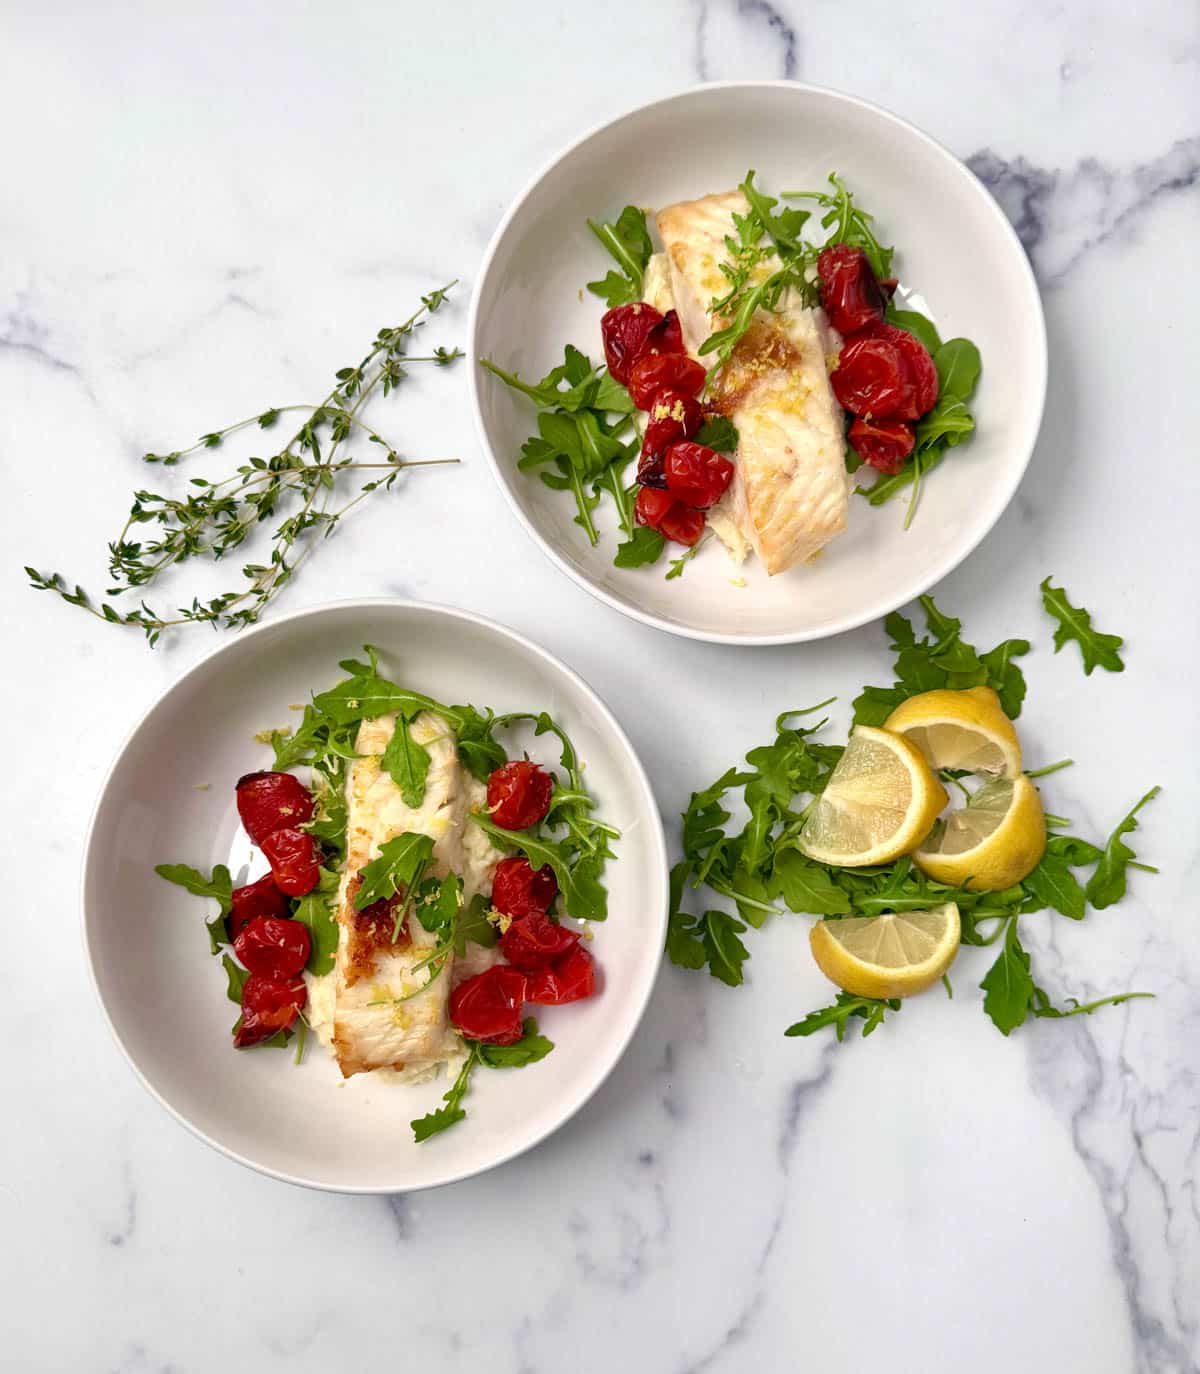 Pan seared fish in white bowls over mashed parsnips with roasted cherry tomatoes and arugula with arugula and lemon slices to the side.